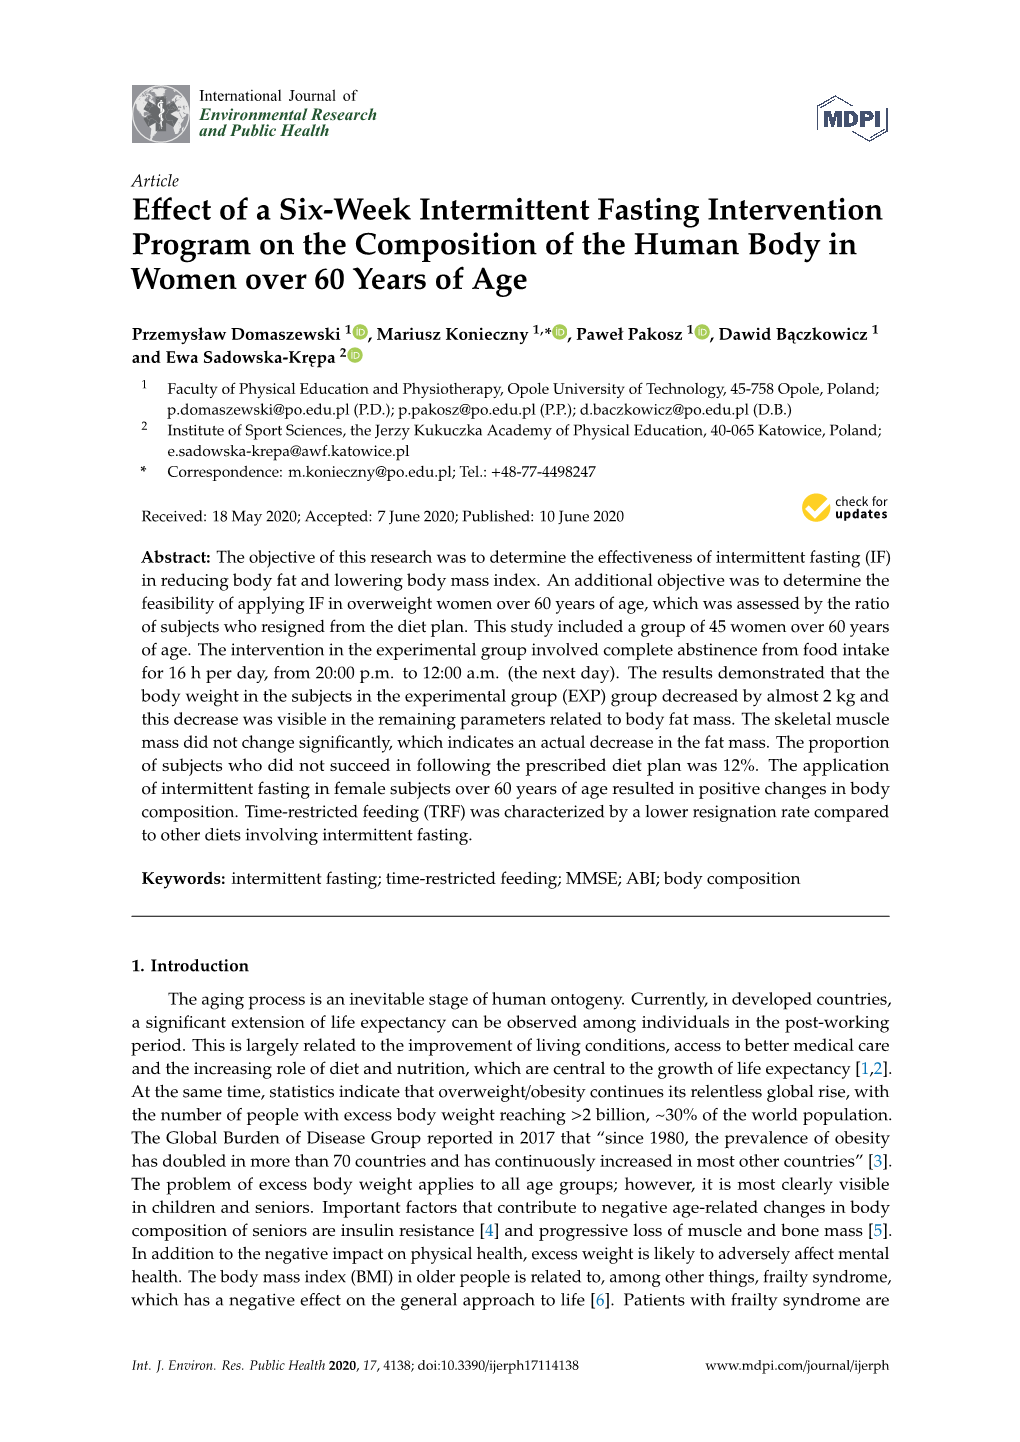 Effect of a Six-Week Intermittent Fasting Intervention Program on the Composition of the Human Body in Women Over 60 Years of Ag